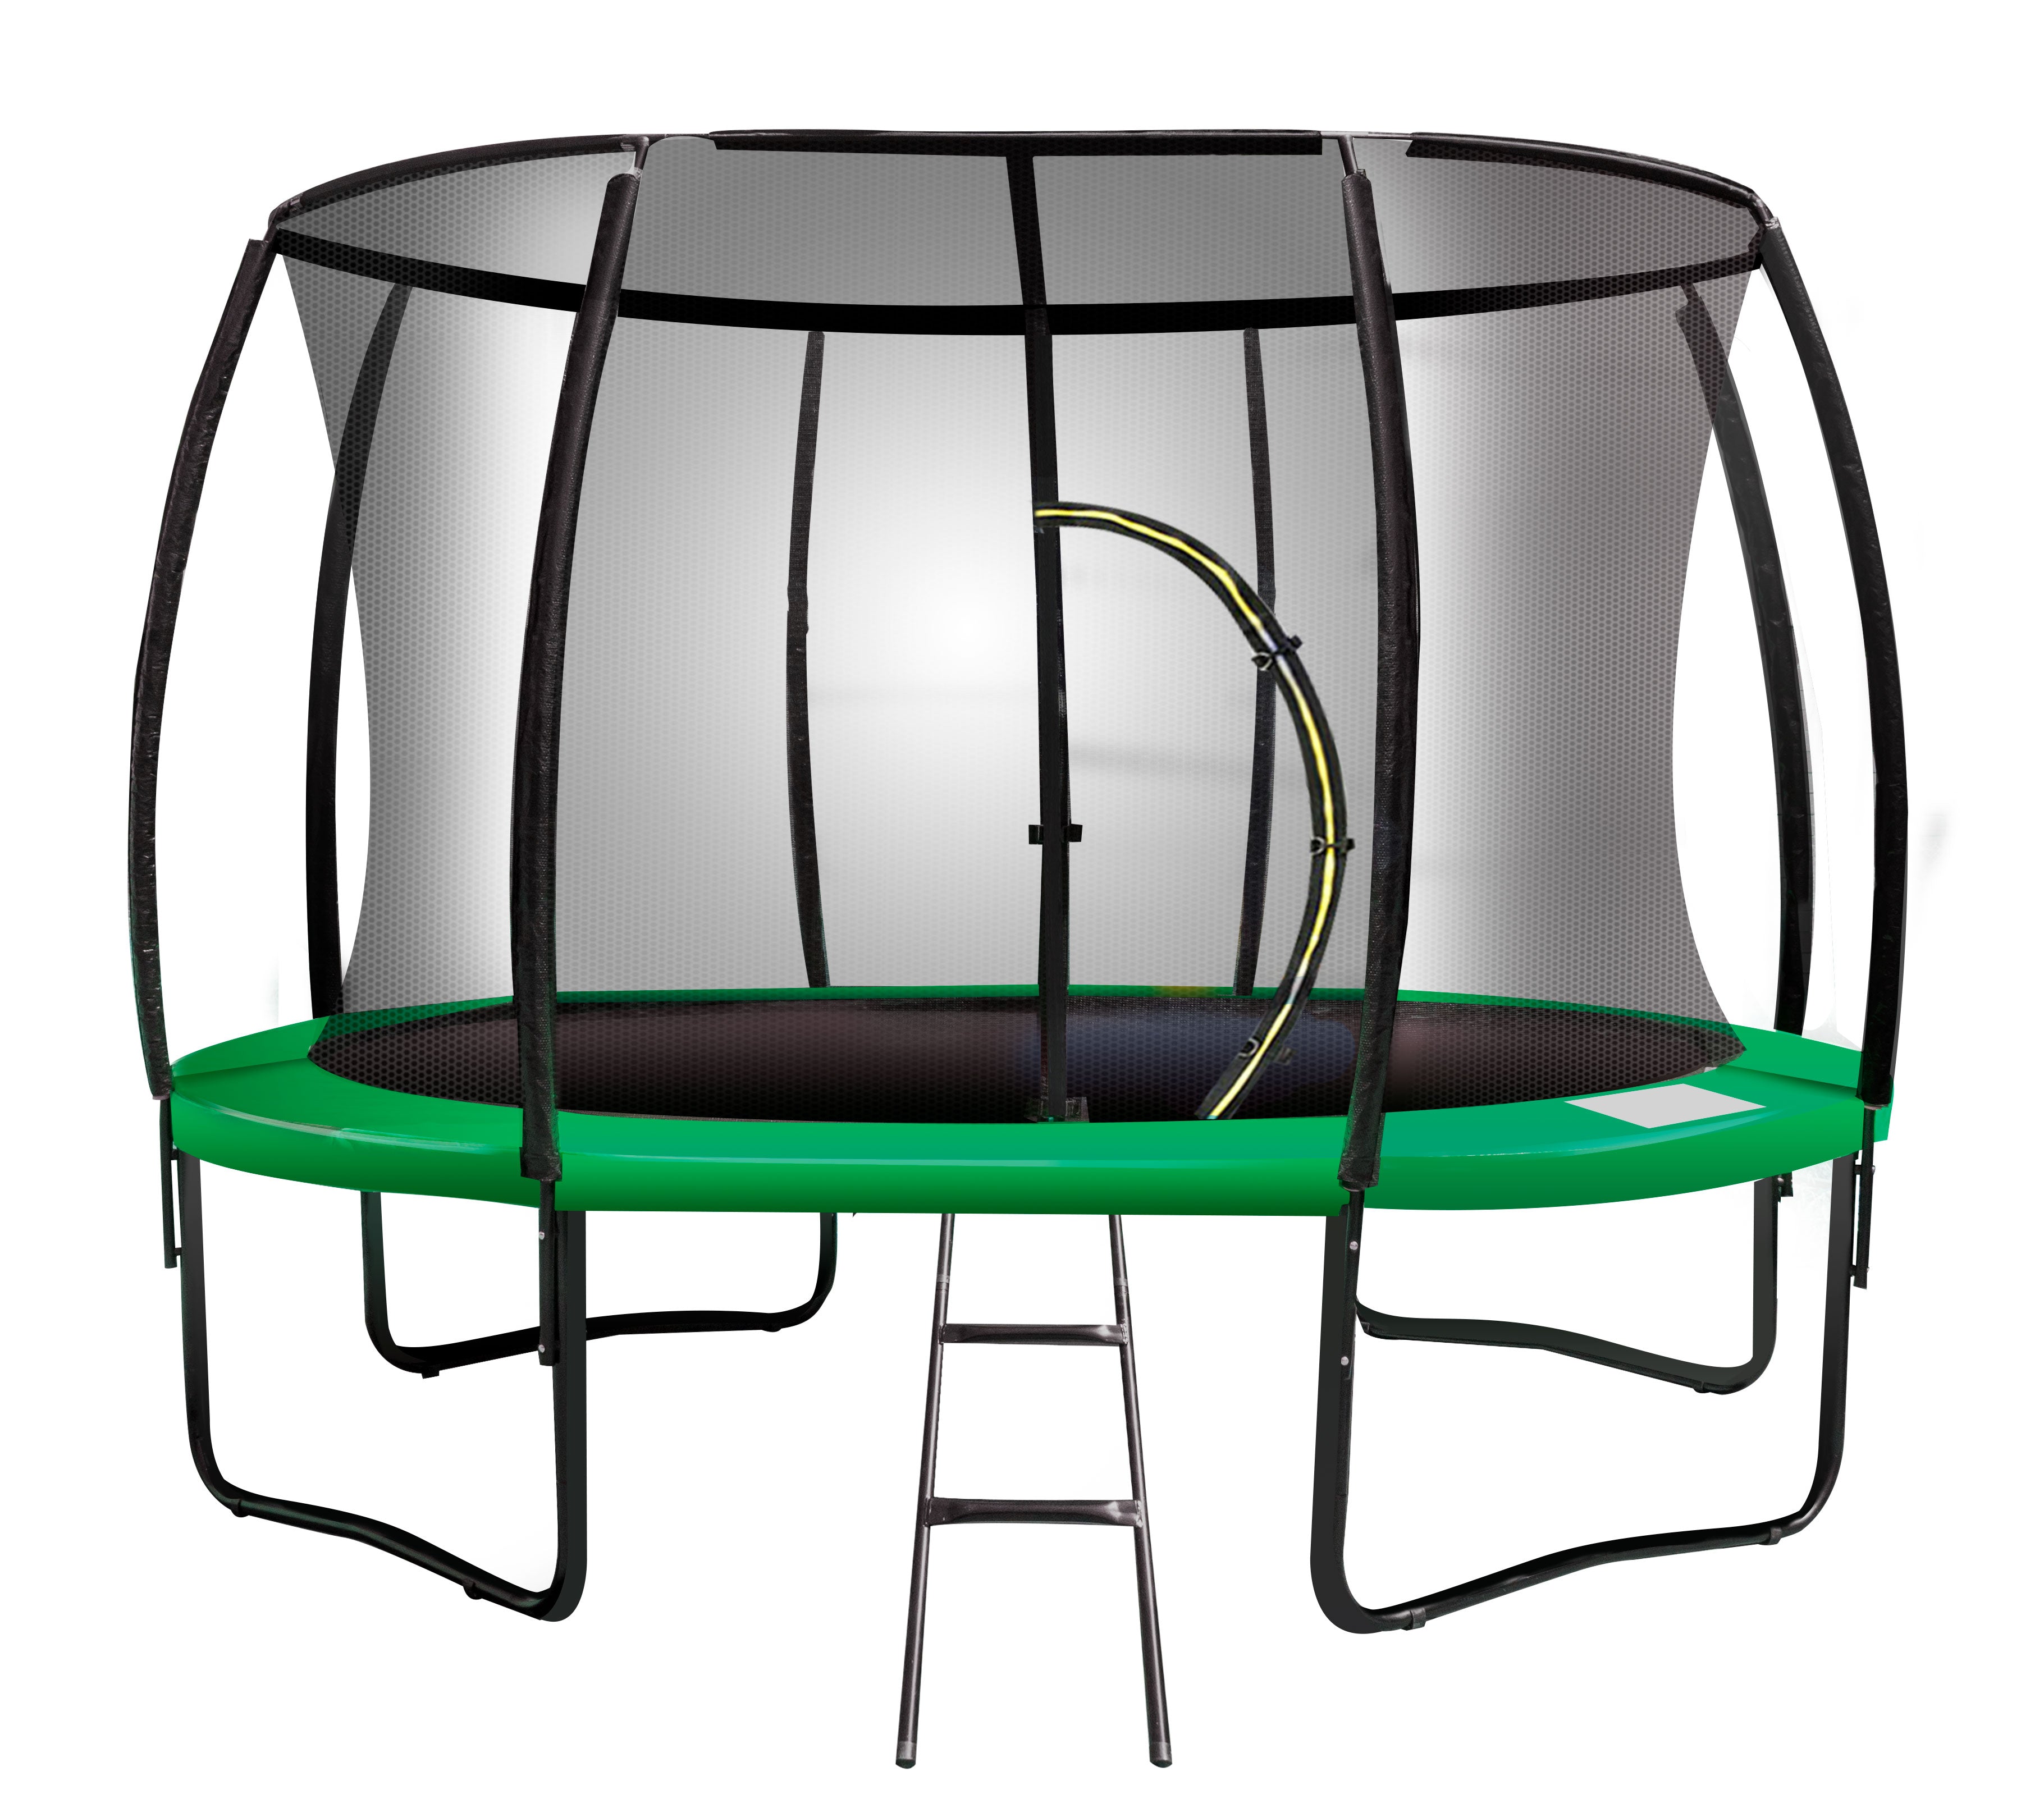 Kahuna 16ft Trampoline Free Ladder Spring Mat Net Safety Pad Cover Round Enclosure - Green - SILBERSHELL